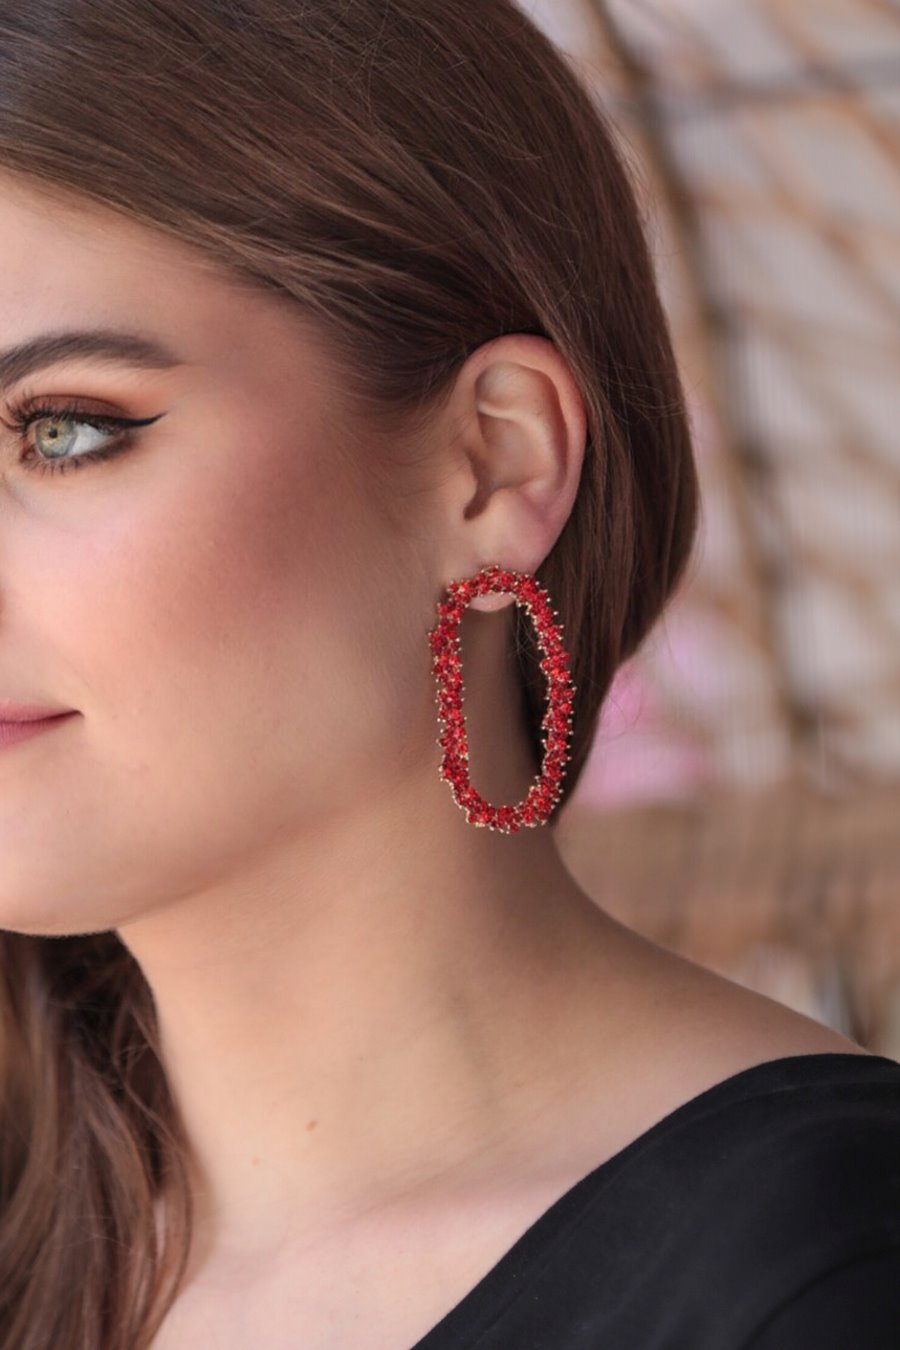 Nykaa - A desi twist. 💖🇮🇳 Avani loves pairing ethnic earrings to add an  edgy, twist to her everyday outfits. 😍 Give us a hell yesss, if you're all  about rocking that